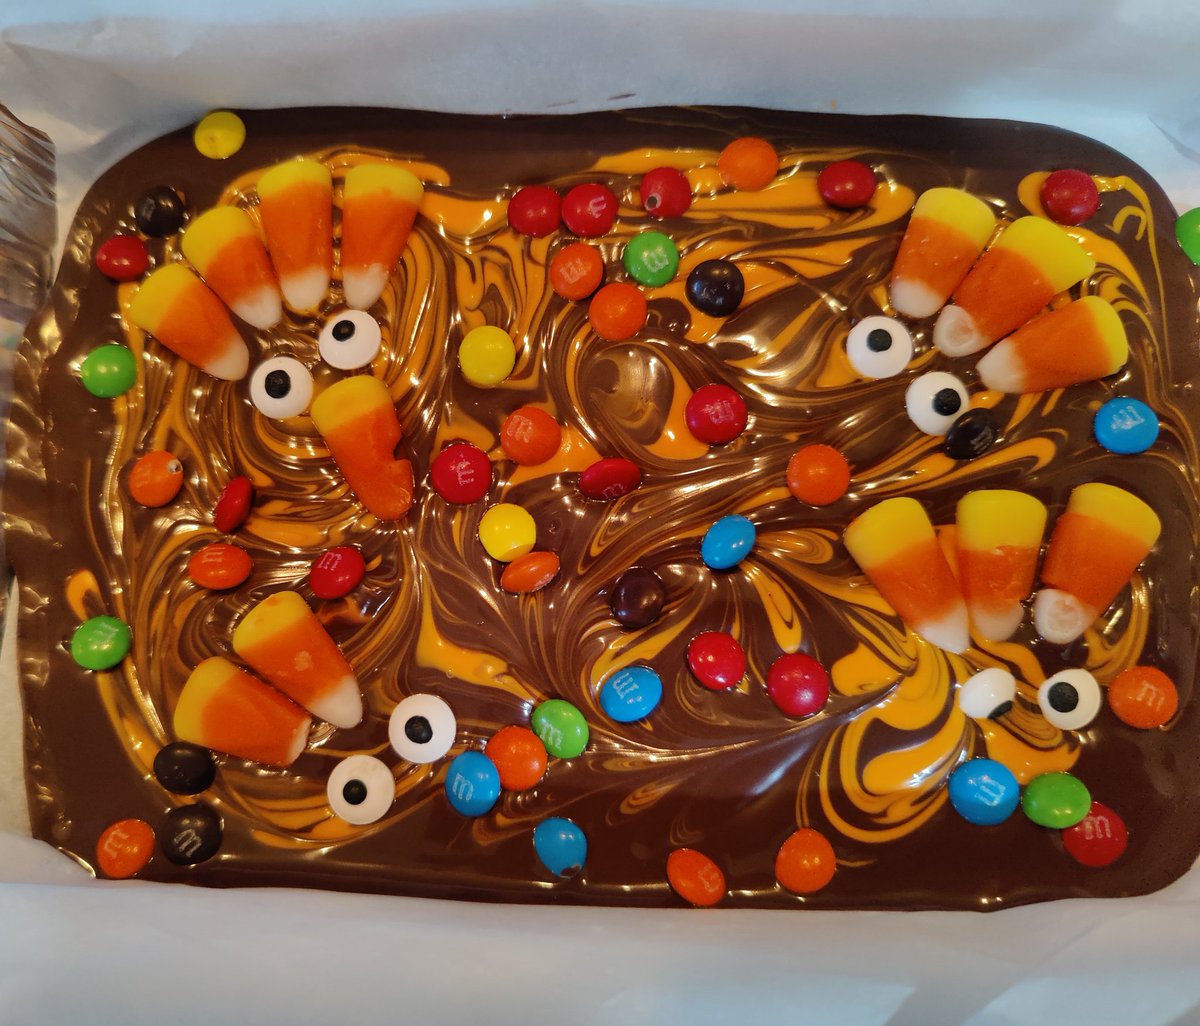 .@AlyzeSam you should look into 'I'm a chef too' I bet the kids would love it. Felix's contribution to #Thanksgiving2022 dinner. 🦃 Bark for dessert
#Baking #STEMeducation #Stem #KidsBaking